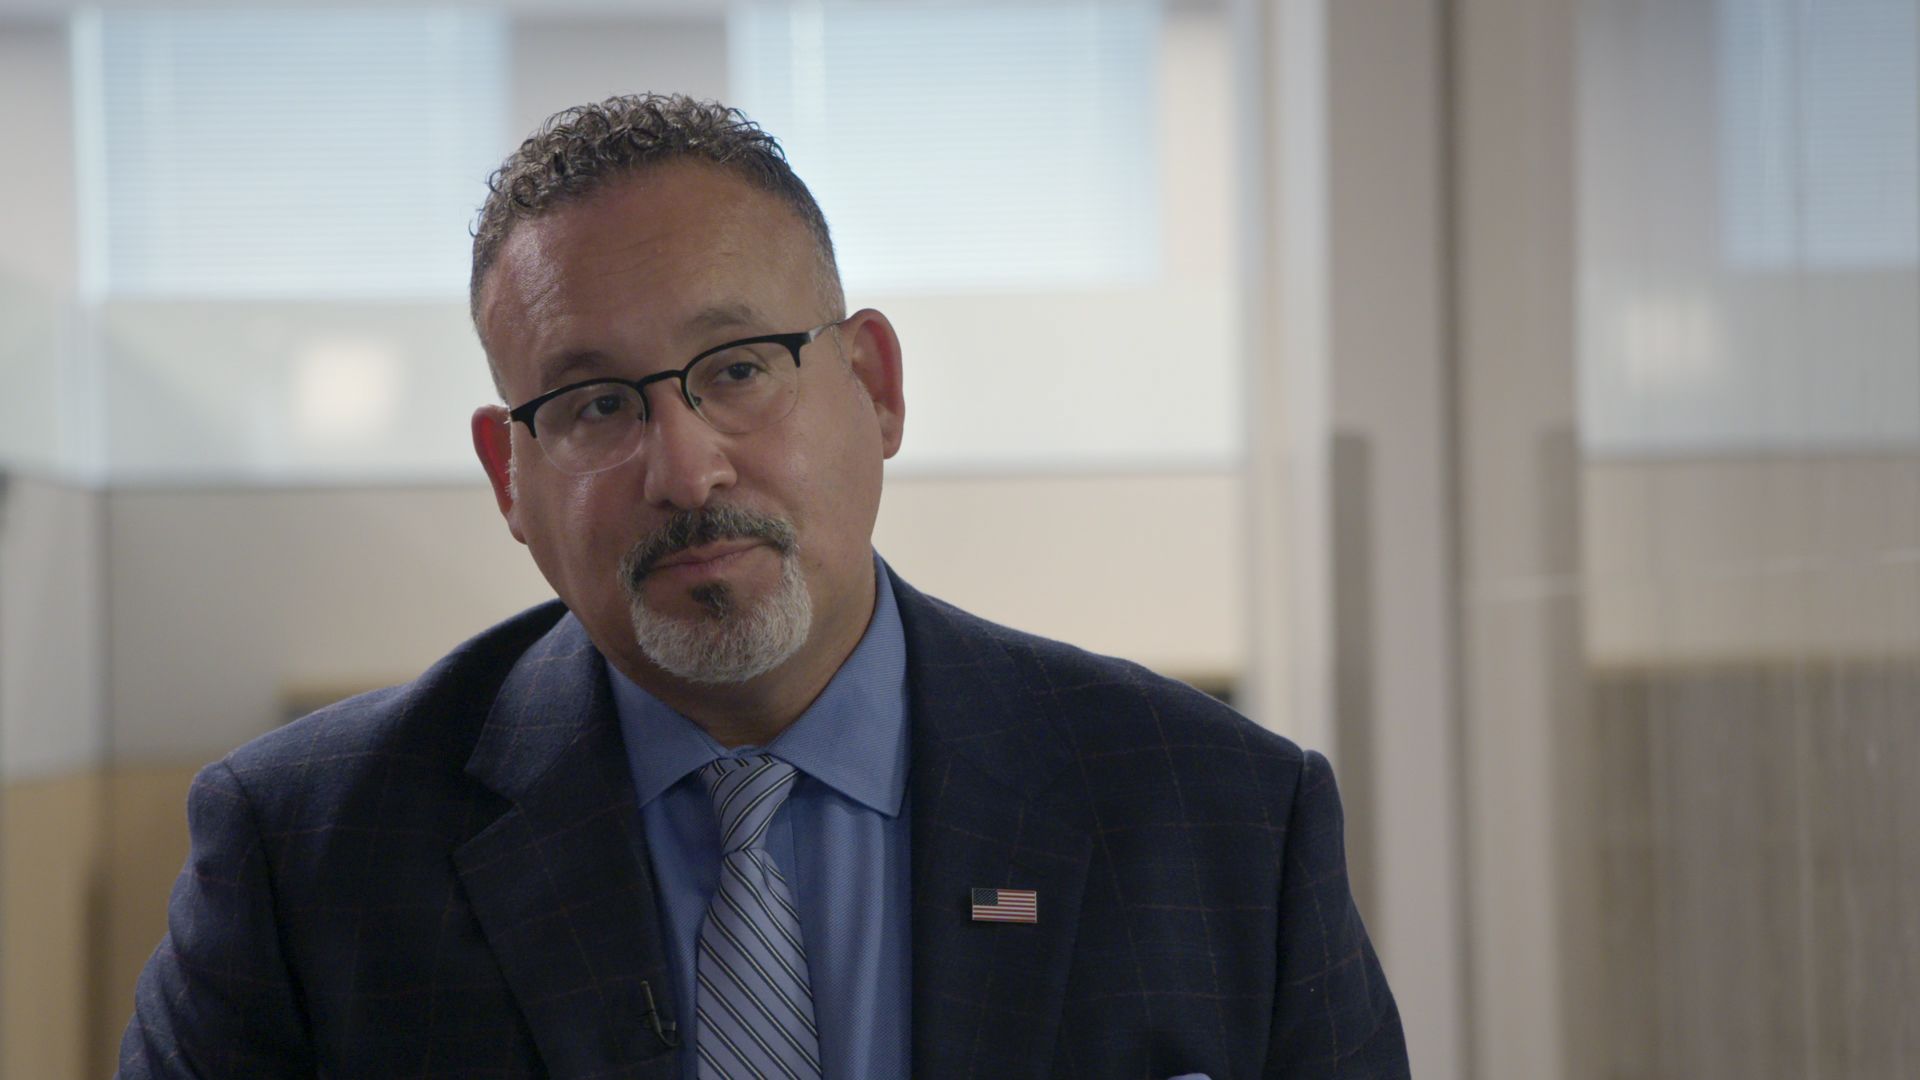 Education Secretary Miguel Cardona is seen during an interview with "Axios on HBO."